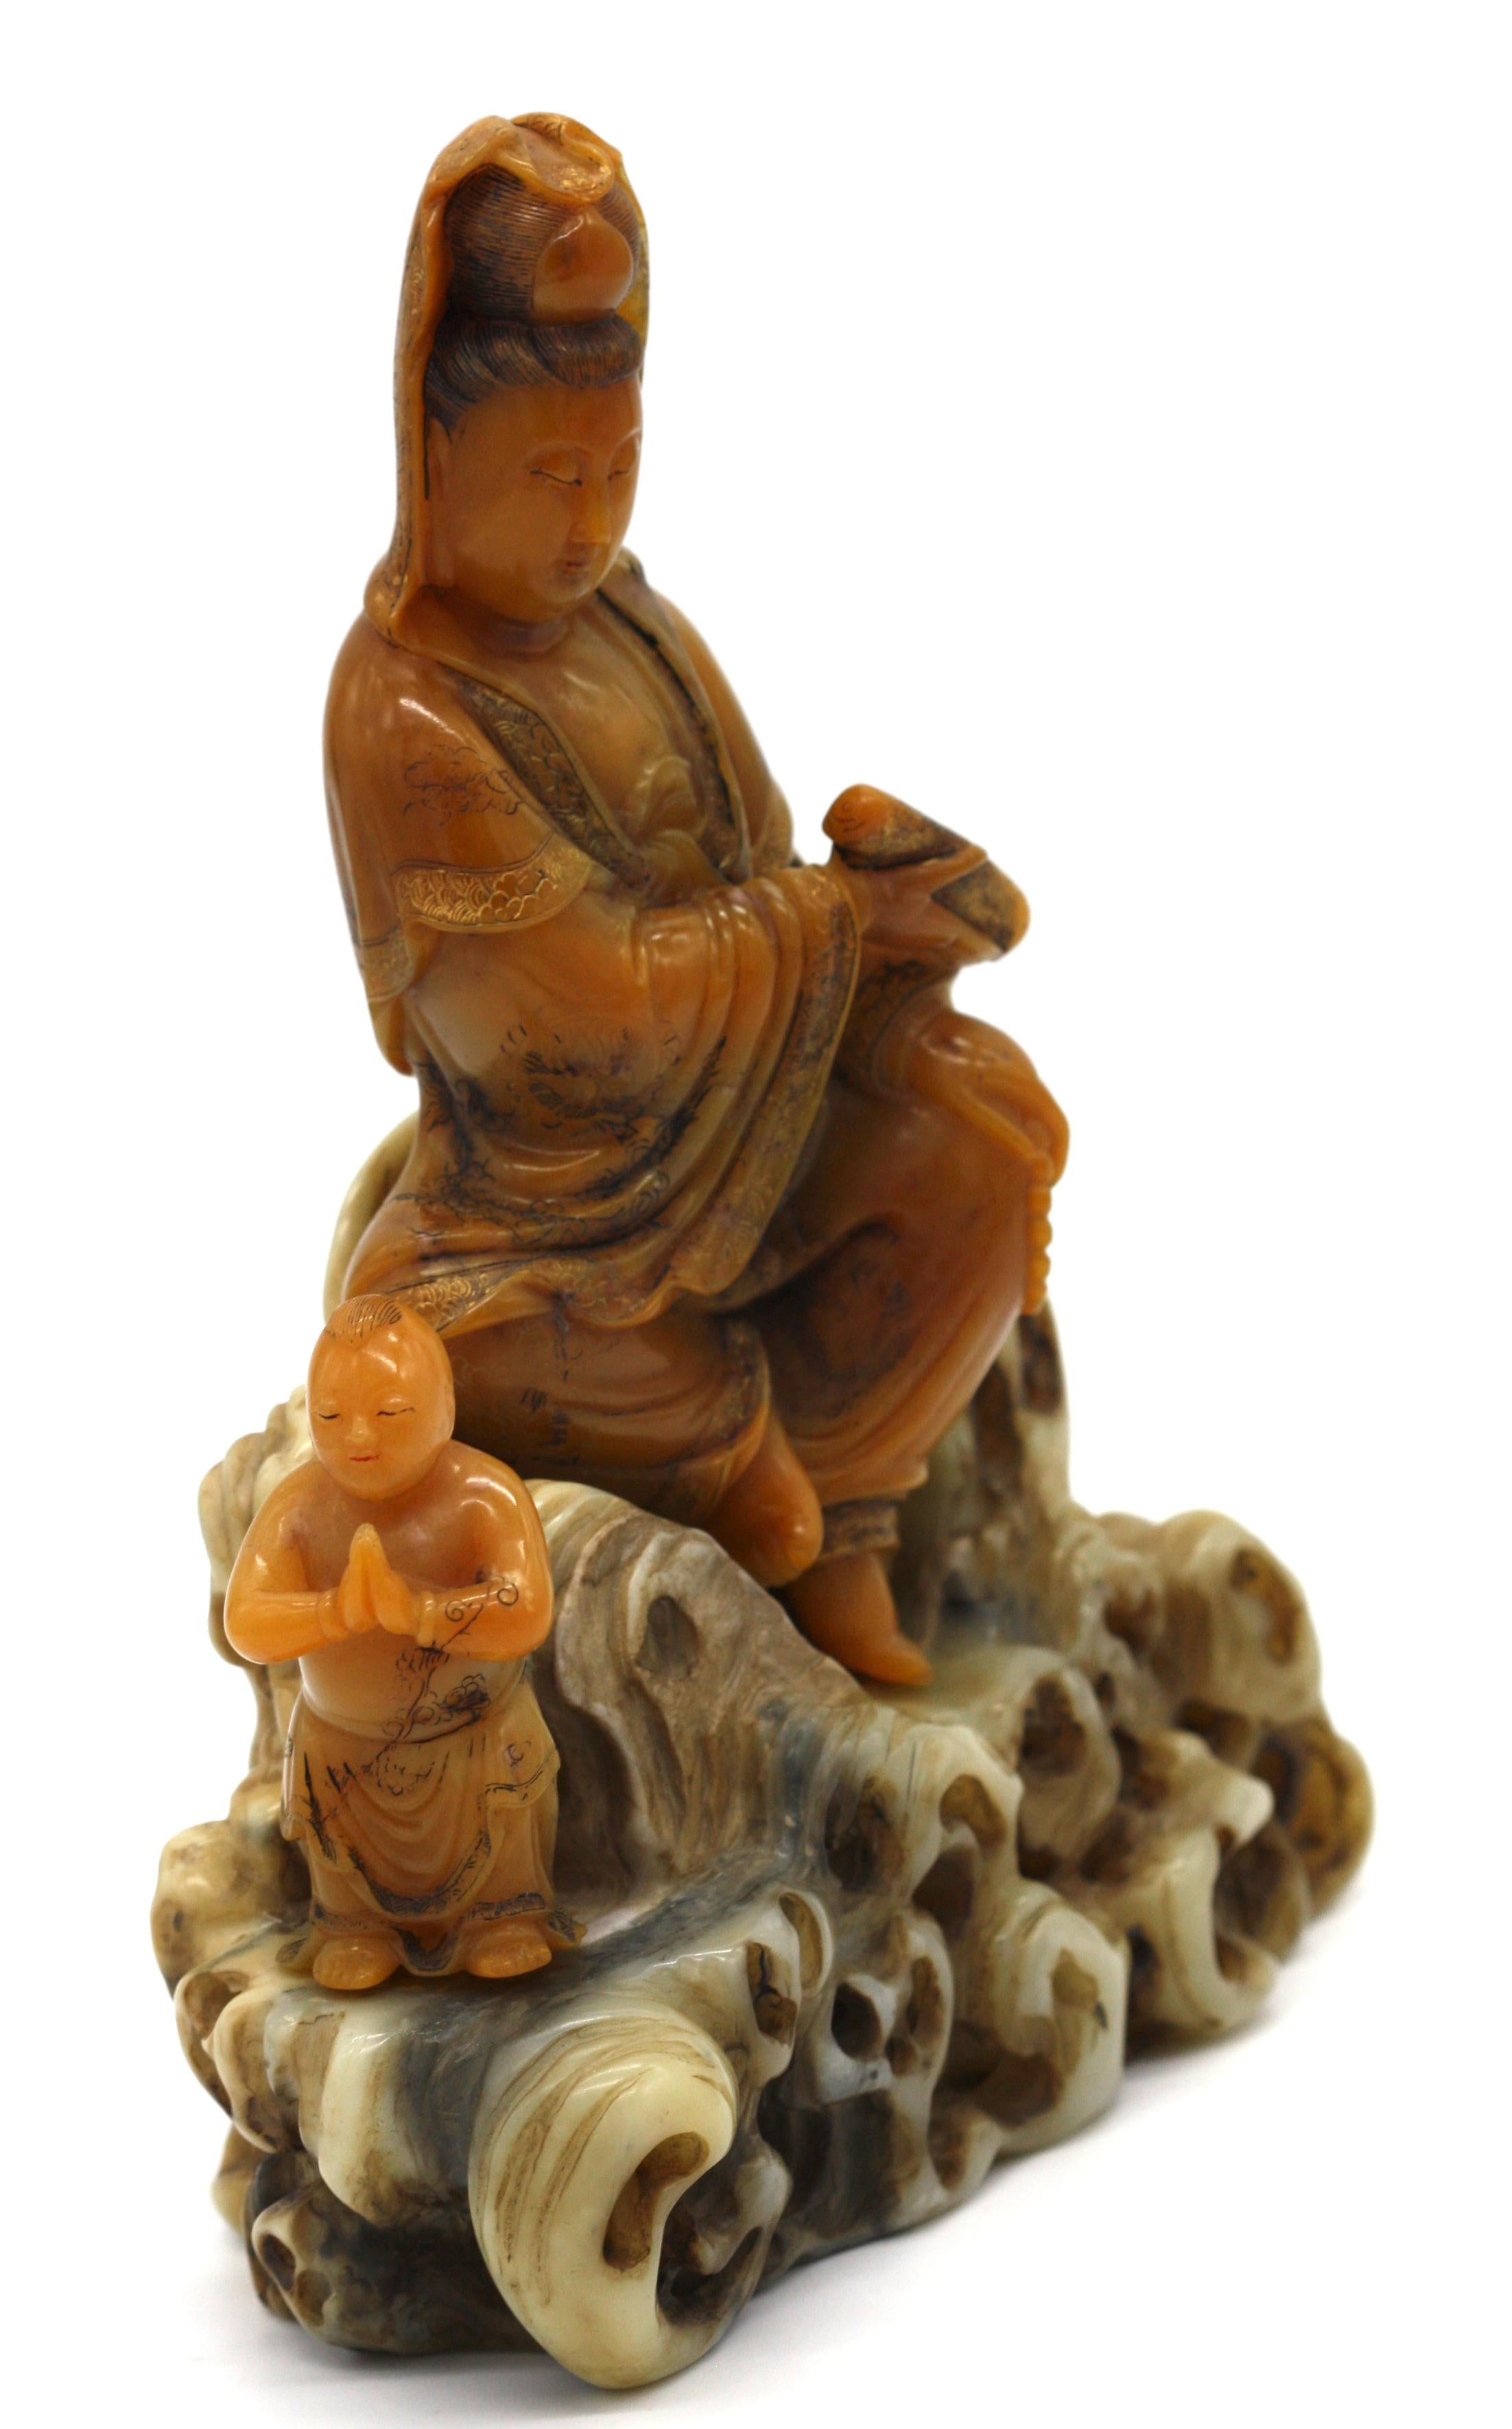 A Chinese soapstone figure of Avalokiteshvara
carved seated beside a standing boy, dressed in a loose robe cascading in ample folds and delicately engraved with foliate scrolls, holding a scroll in one hand, her face with a benevolent expression